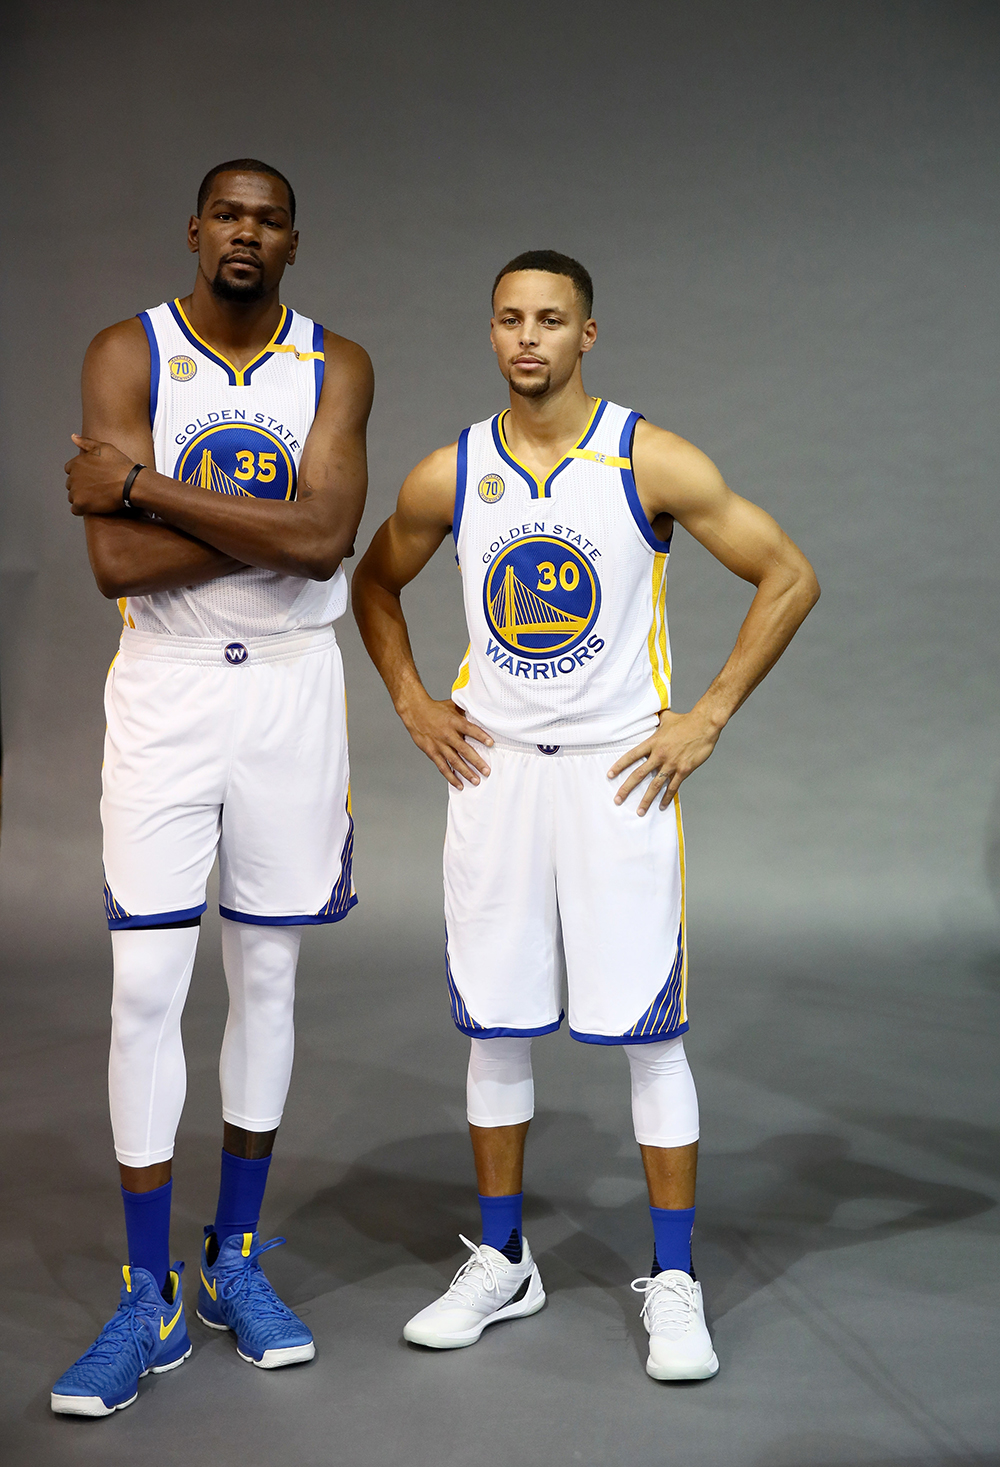 Kevin Durant: Nike KD 9, Stephen Curry: Under Armour Curry 3 Low